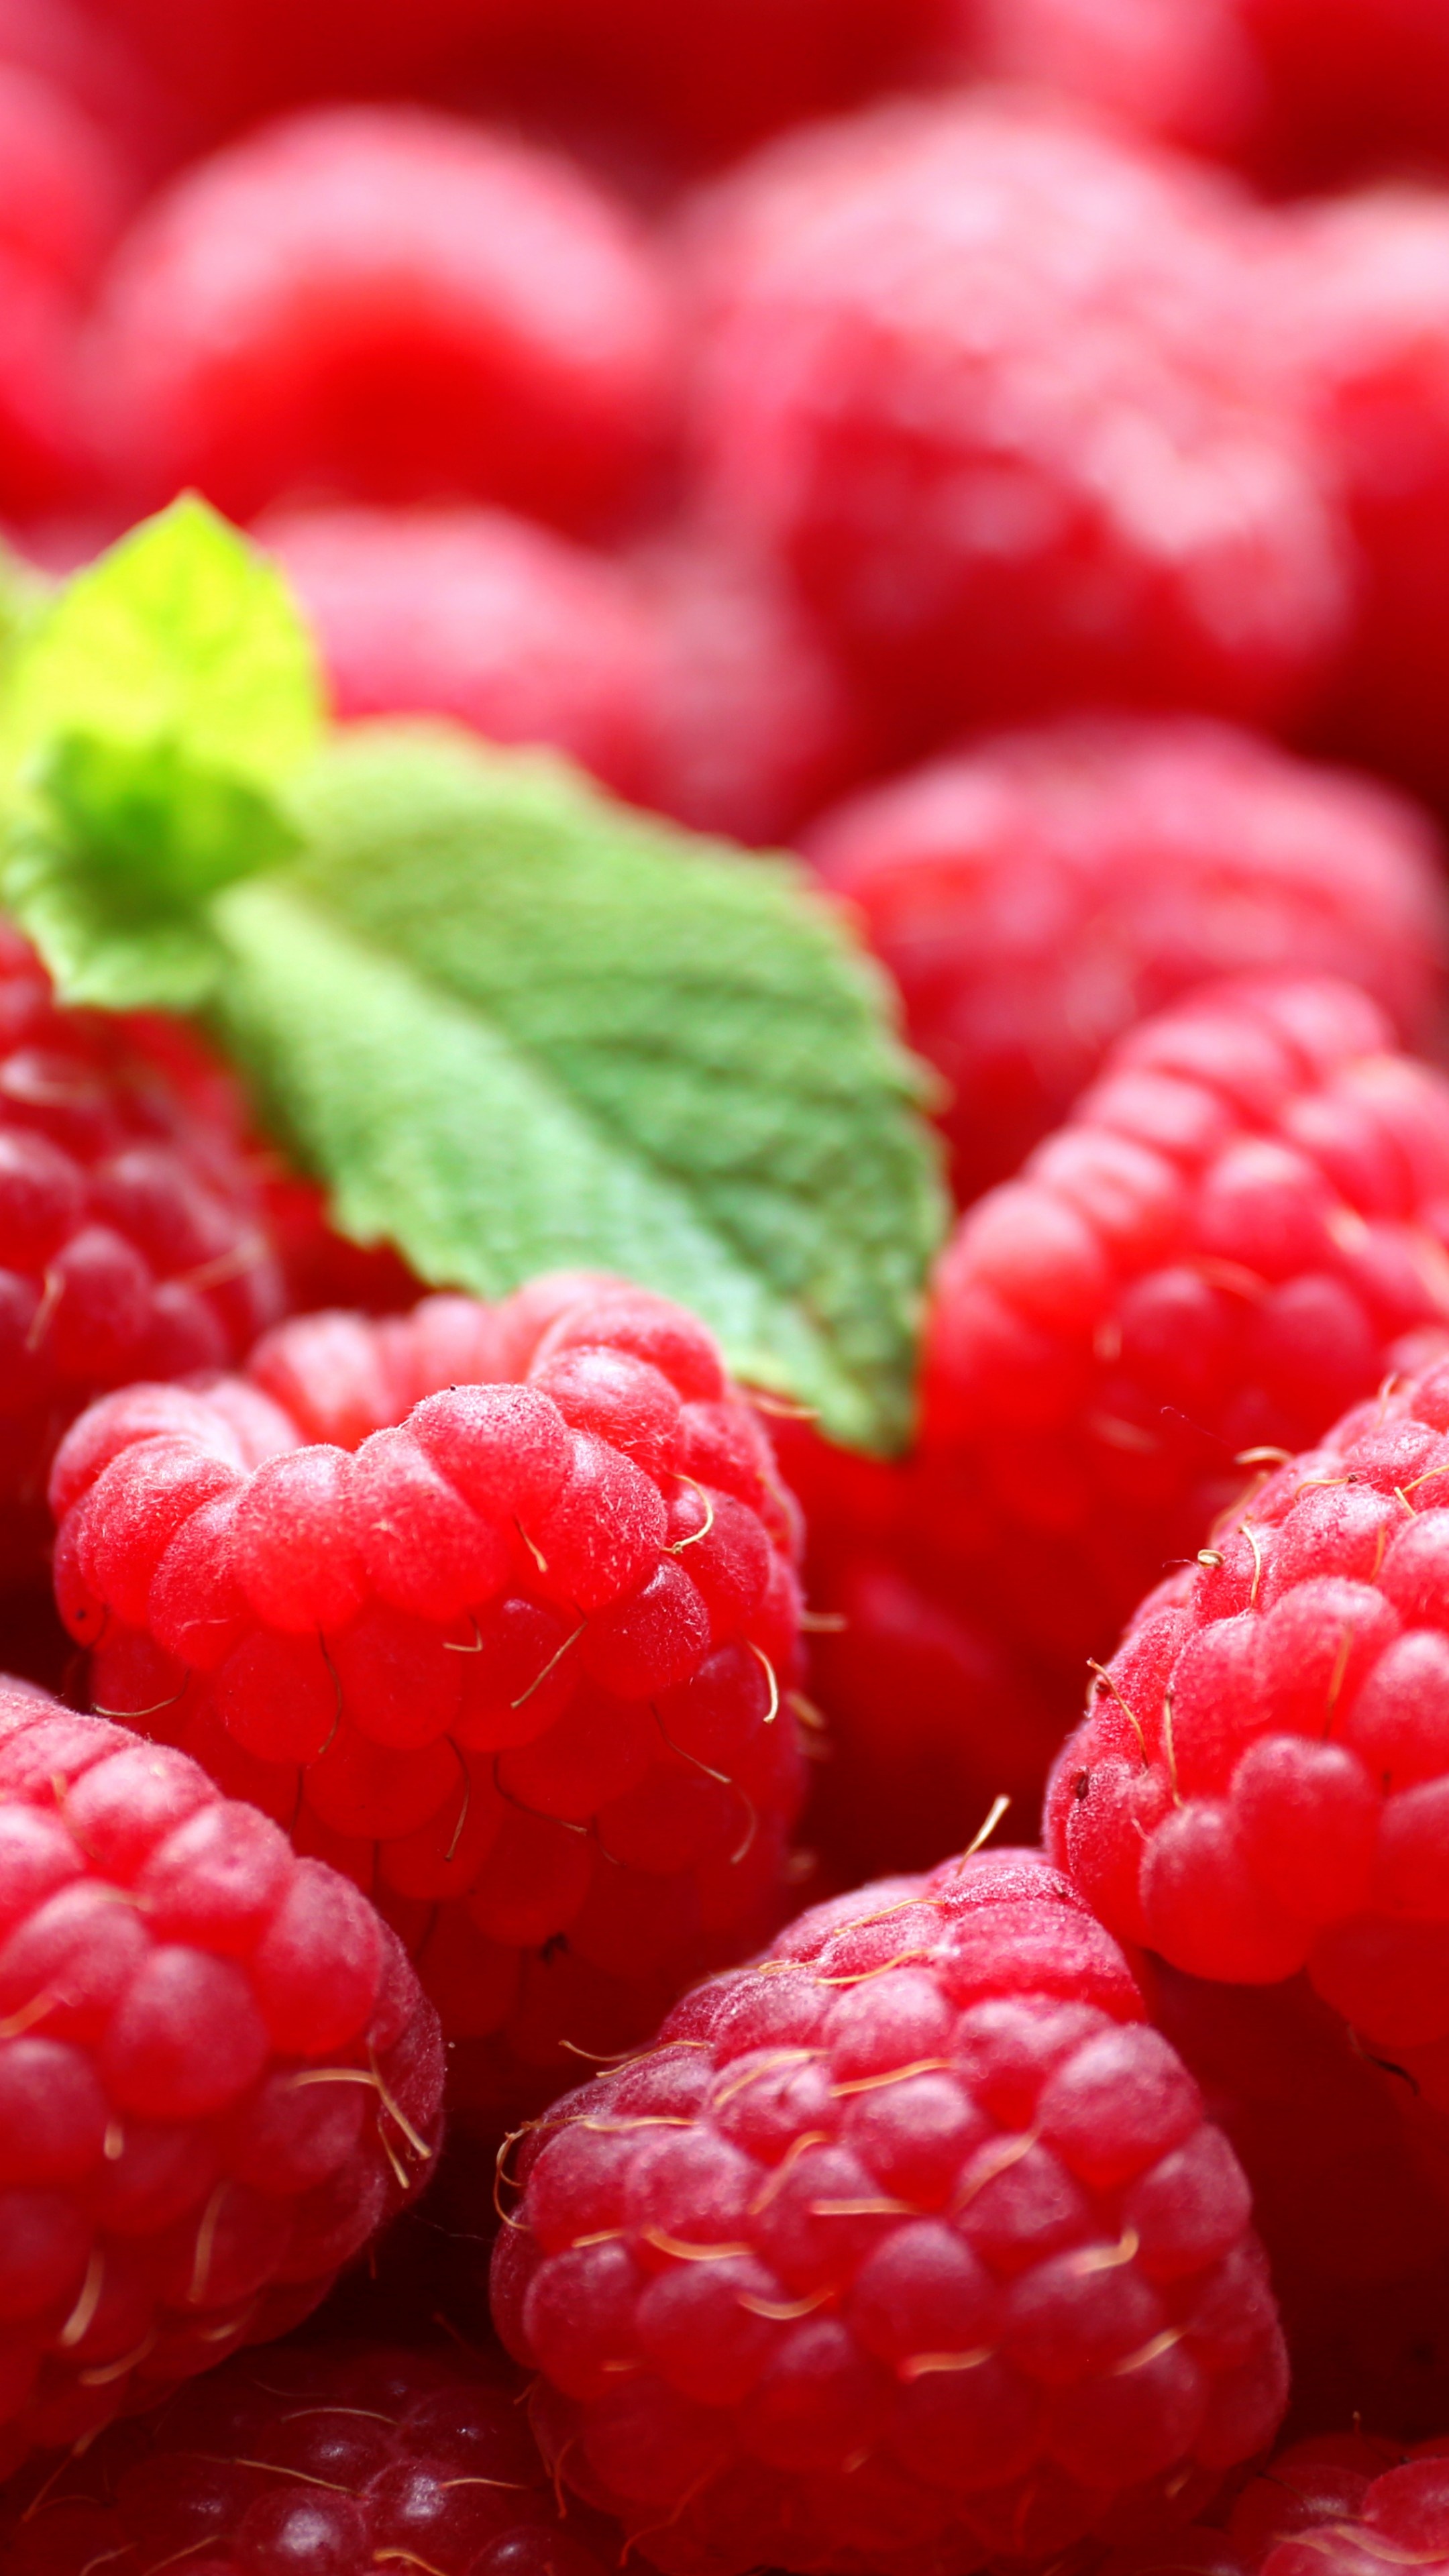 Vibrant raspberry wallpaper, Refreshing and juicy, Nature's beauty, Bursting with color, 2160x3840 4K Phone